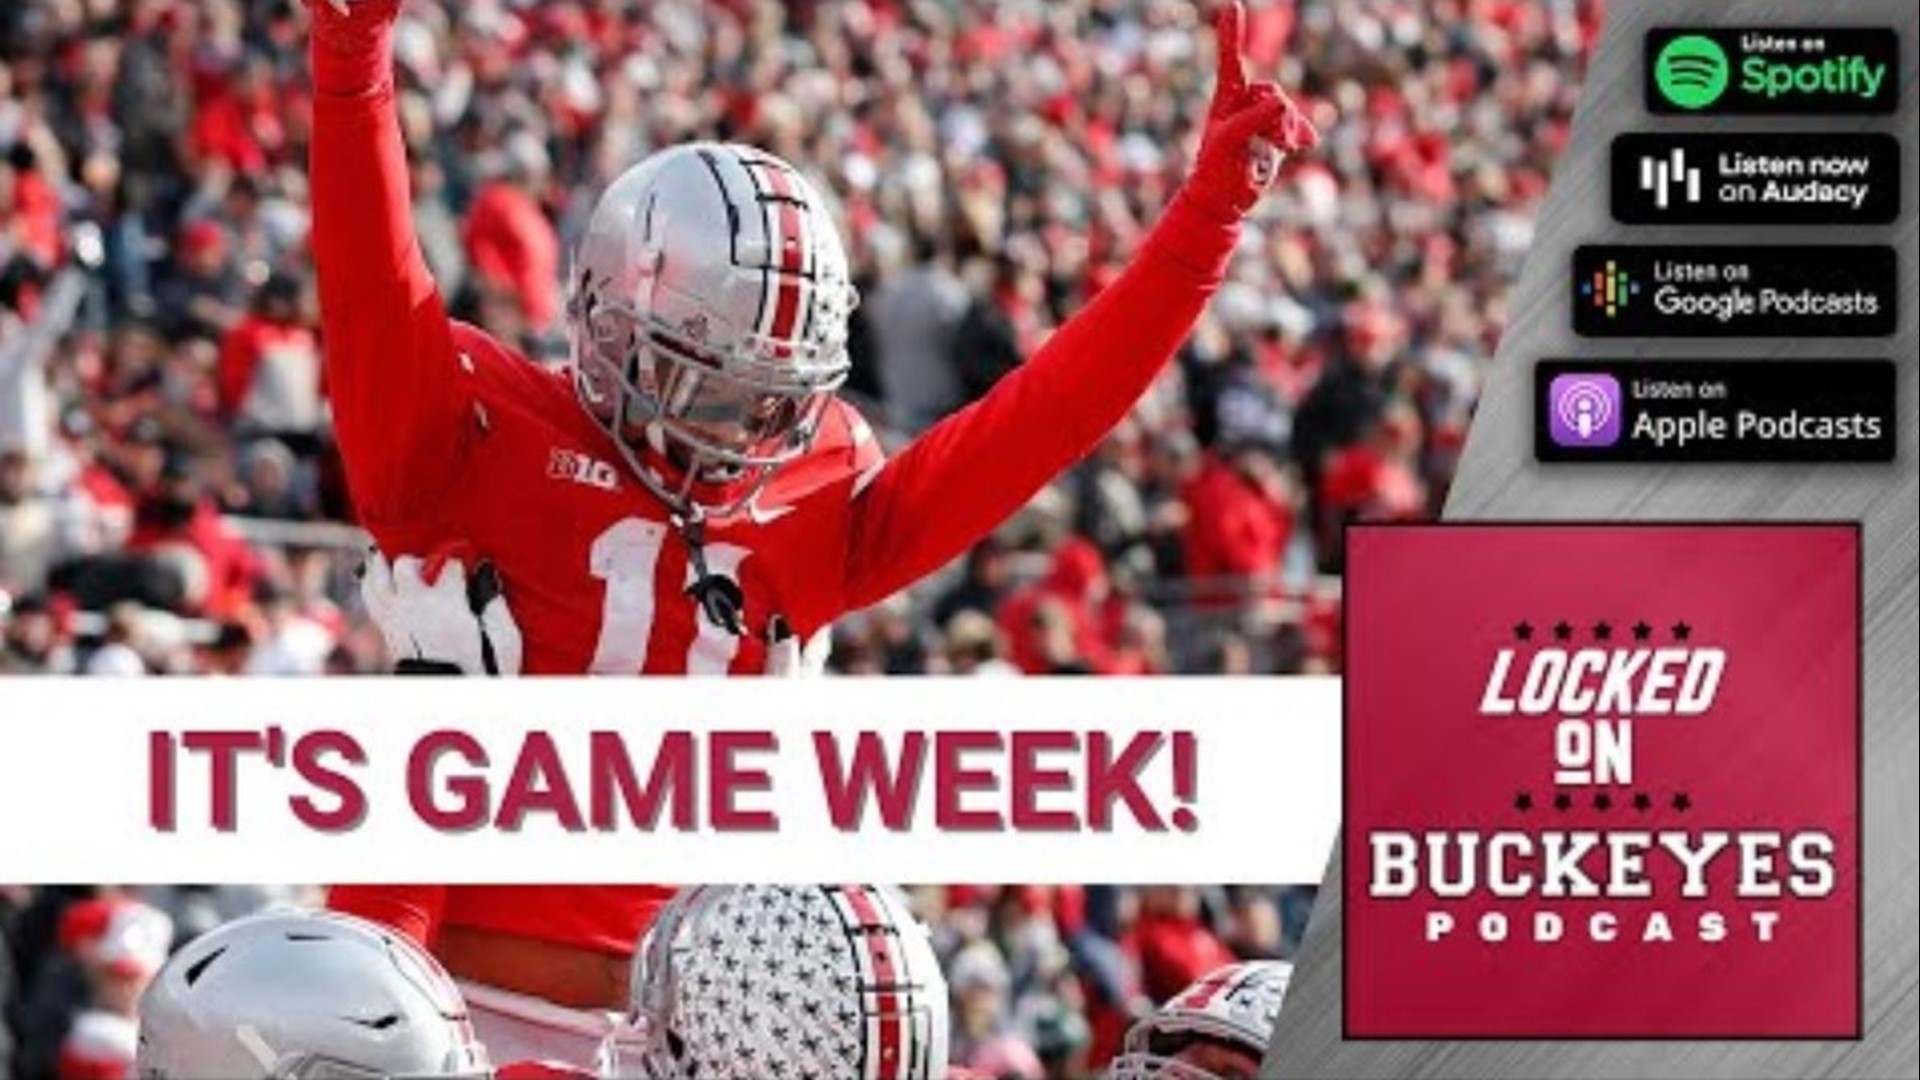 As Ohio State prepares for their matchup with Notre Dame, Locked on Buckeyes will get you ready for the first game of the year.